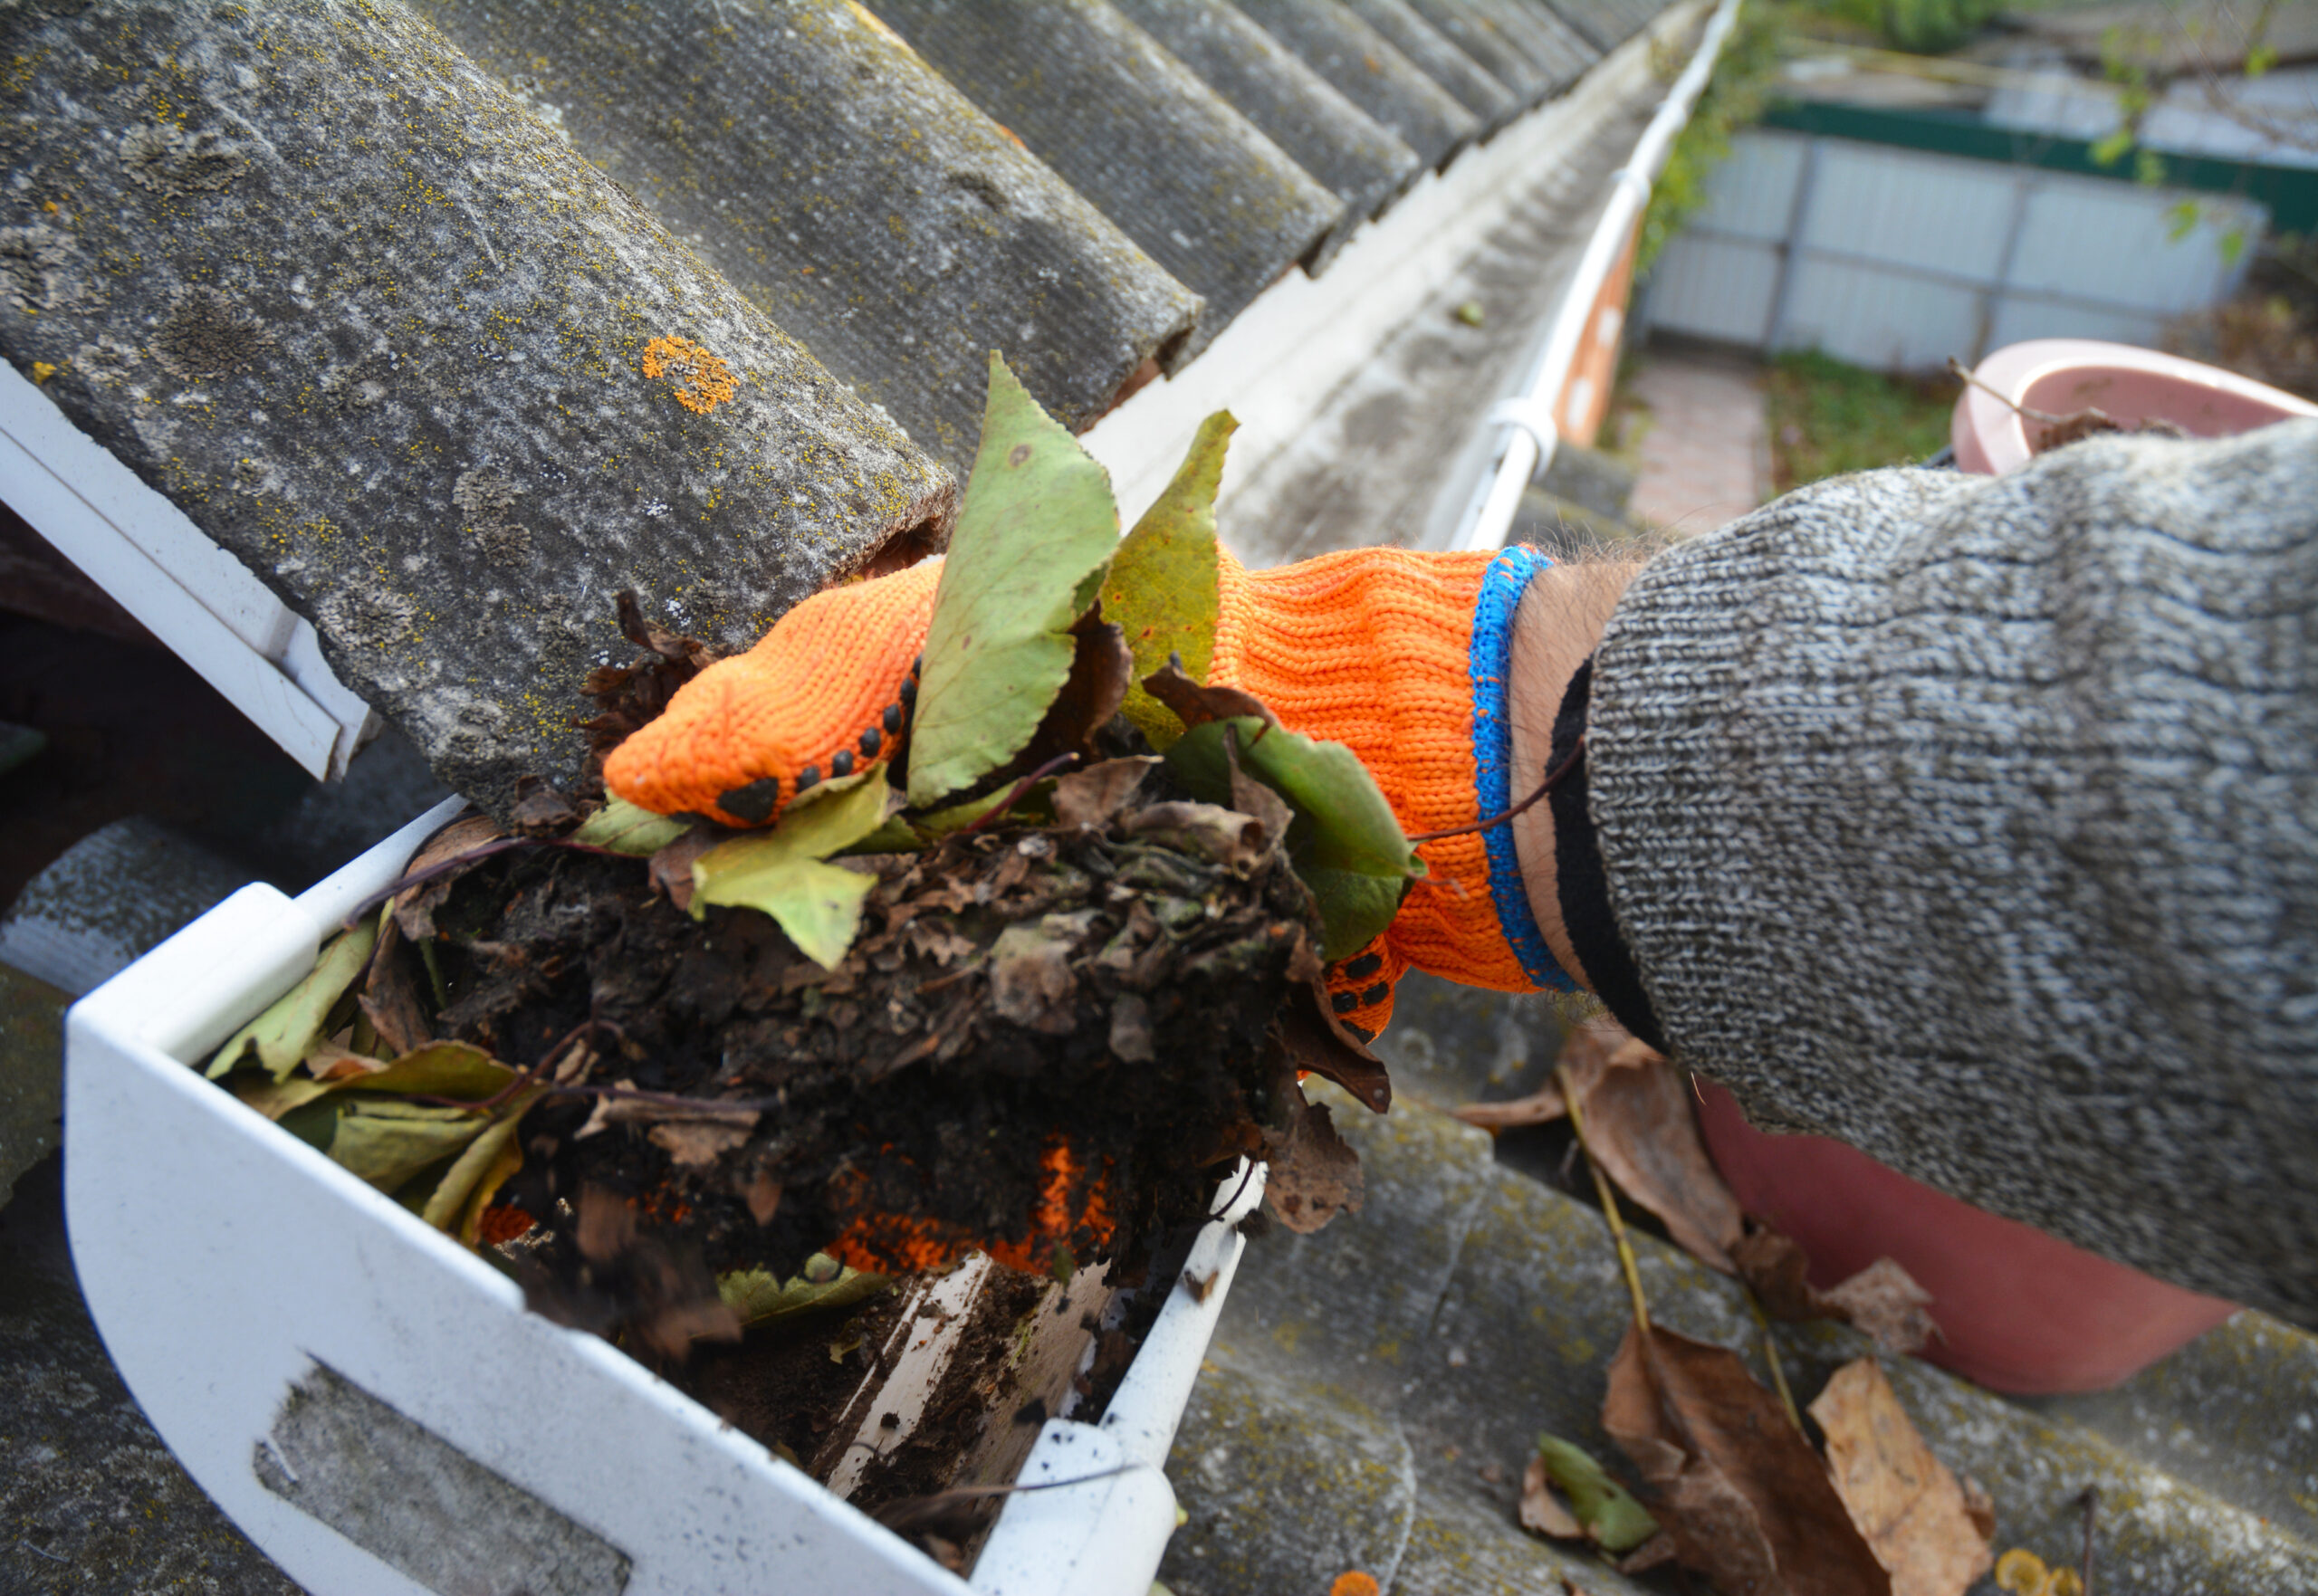 orange gloved hand cleaning a dirty gutter